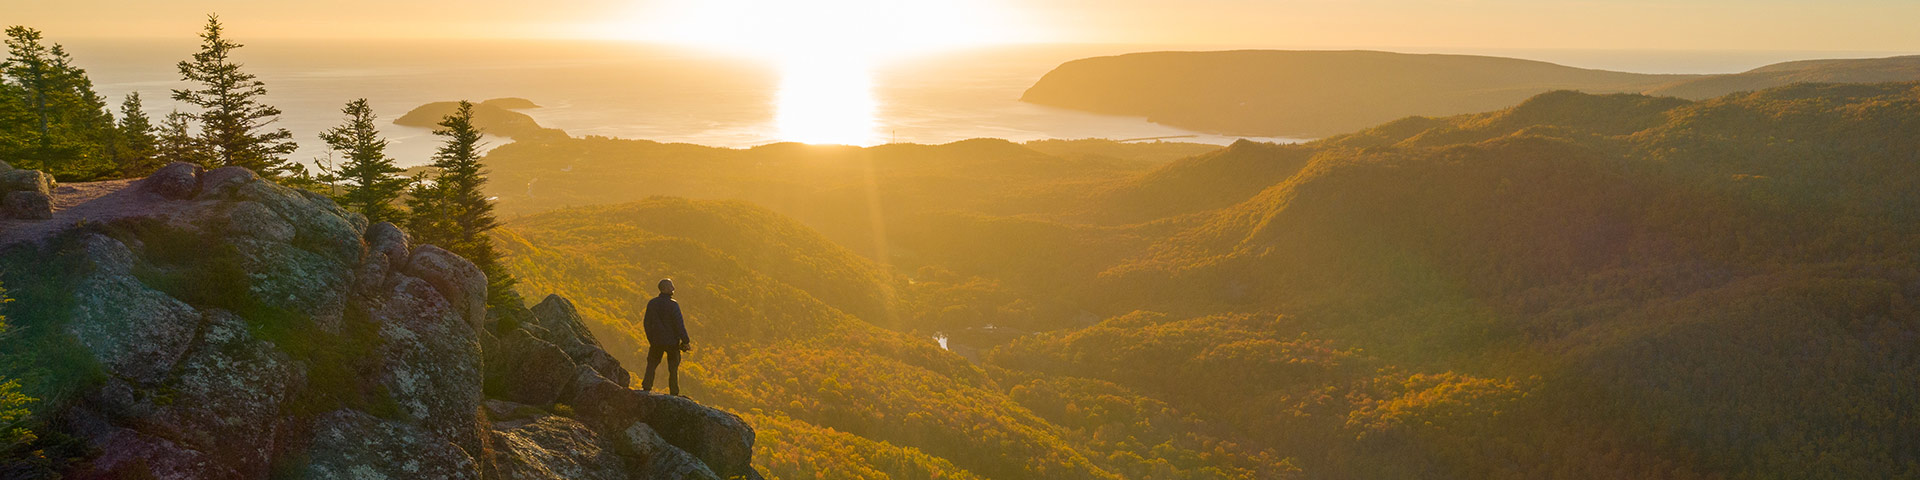 A person viewing the sunset at Cape Breton Highlands National Park